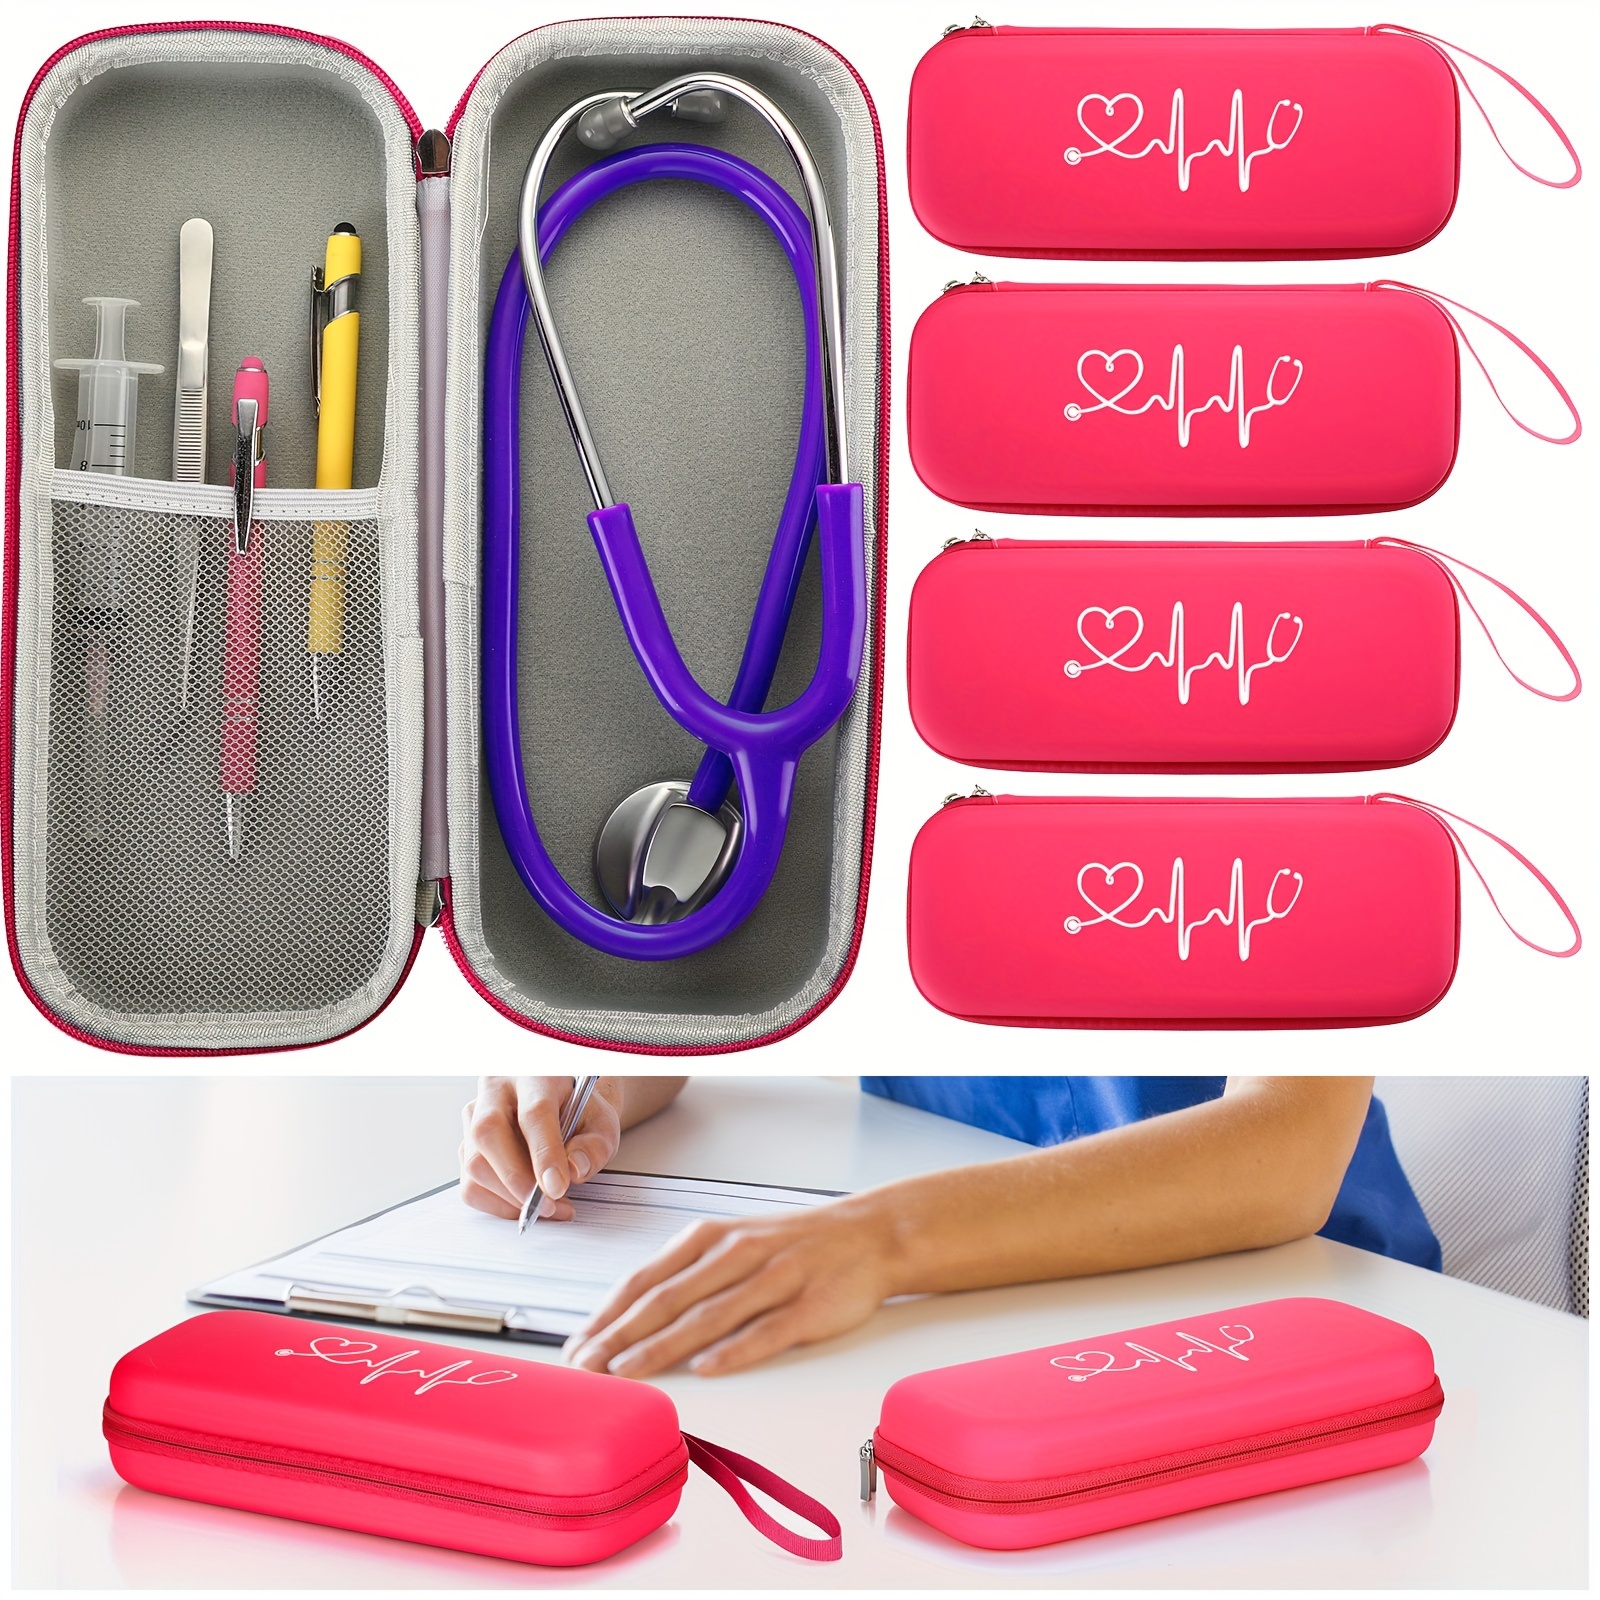 

4 Pcs Cna Week Gifts Stethoscope Carrying Case Stethoscope Travel Case For Nurses Week Gift Lightweight Nurse Gifts For Women Stethoscope Case For Nurse Appreciation Gifts